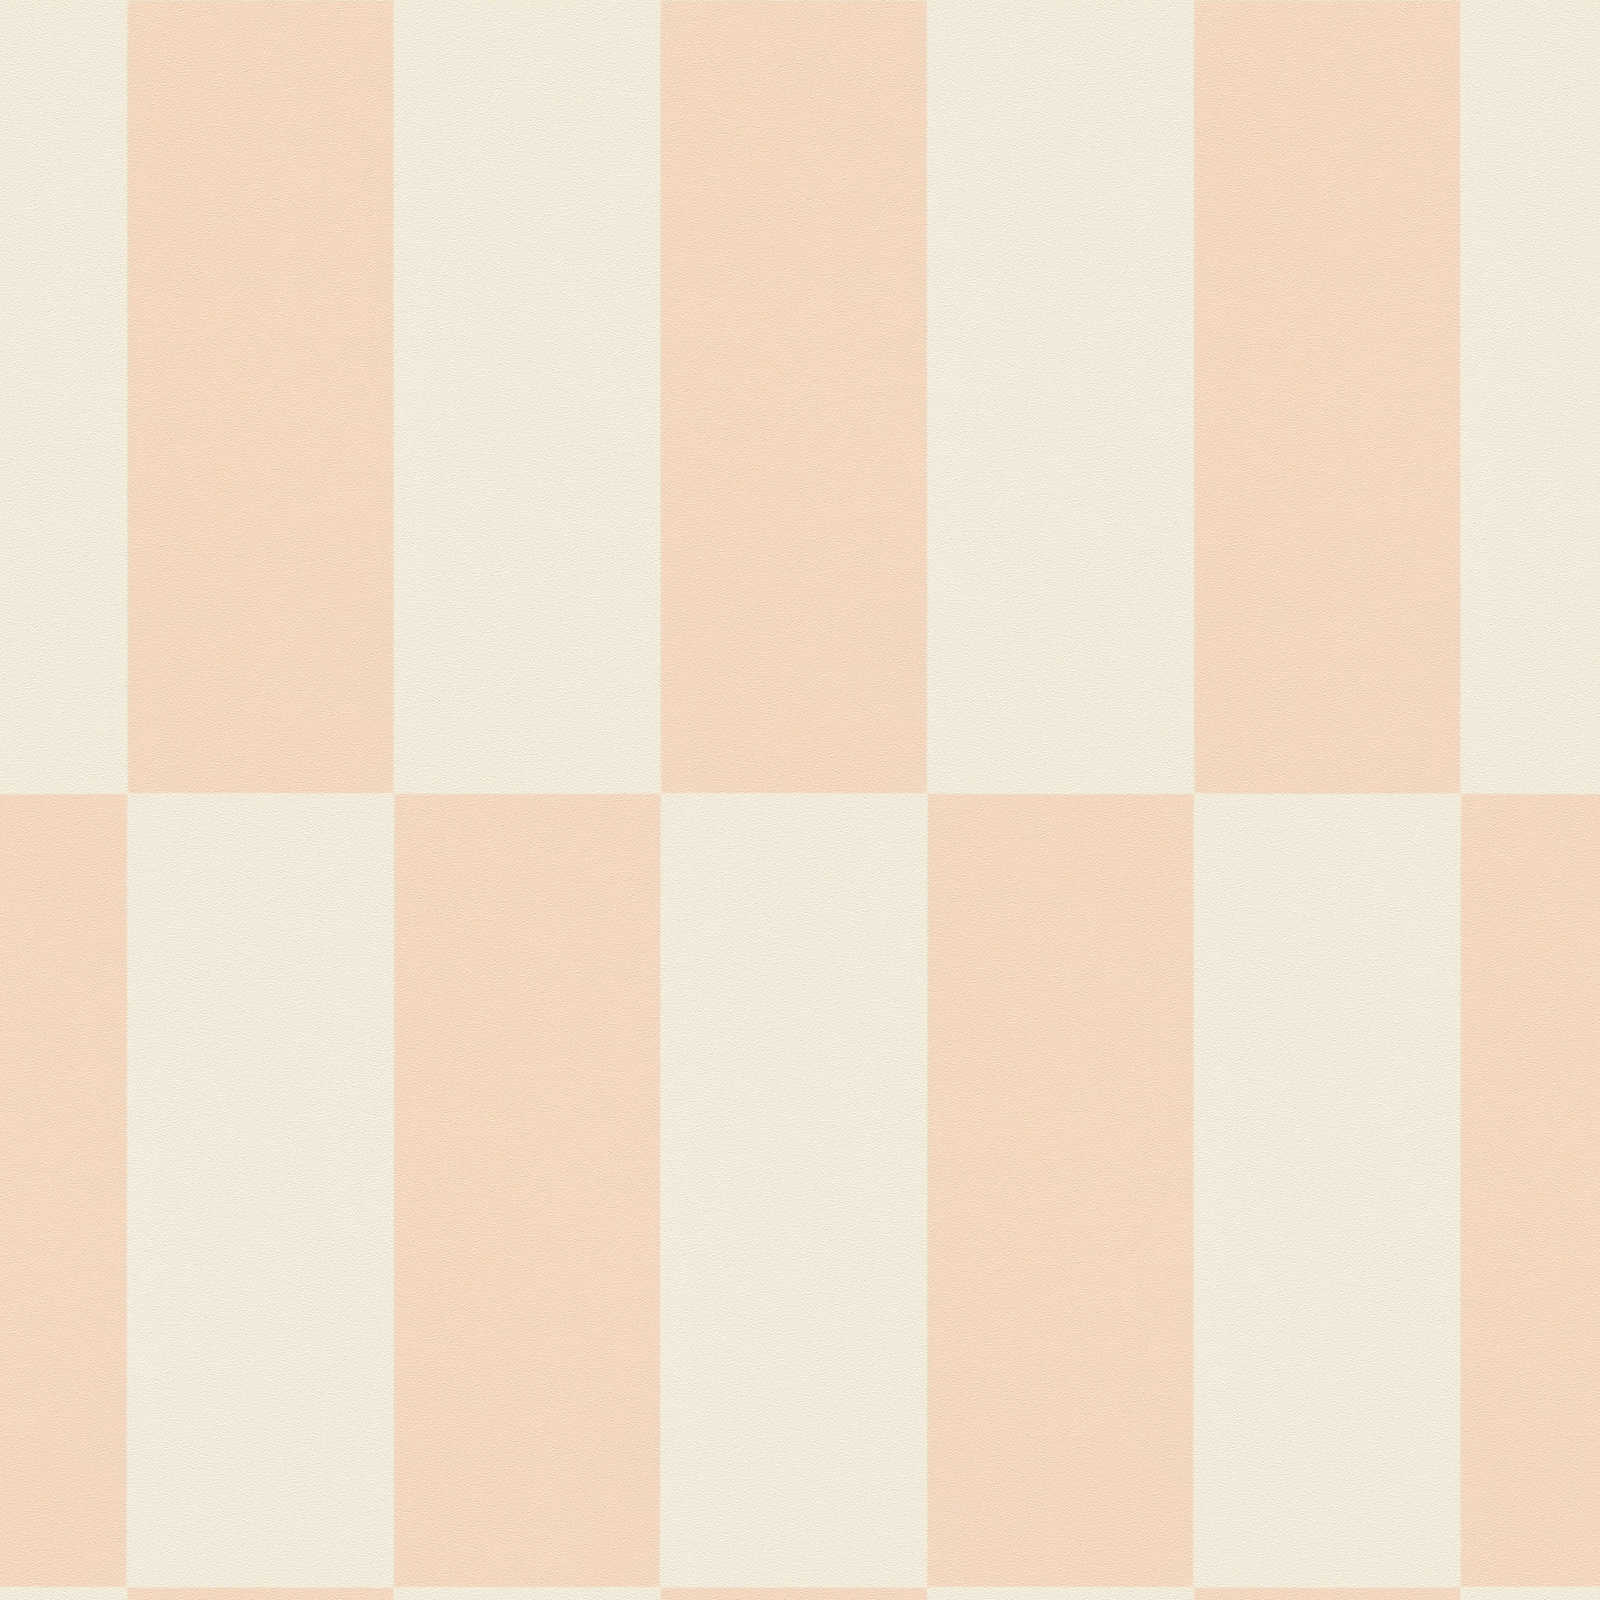             Non-woven wallpaper with graphic rectangle pattern - cream, pink
        